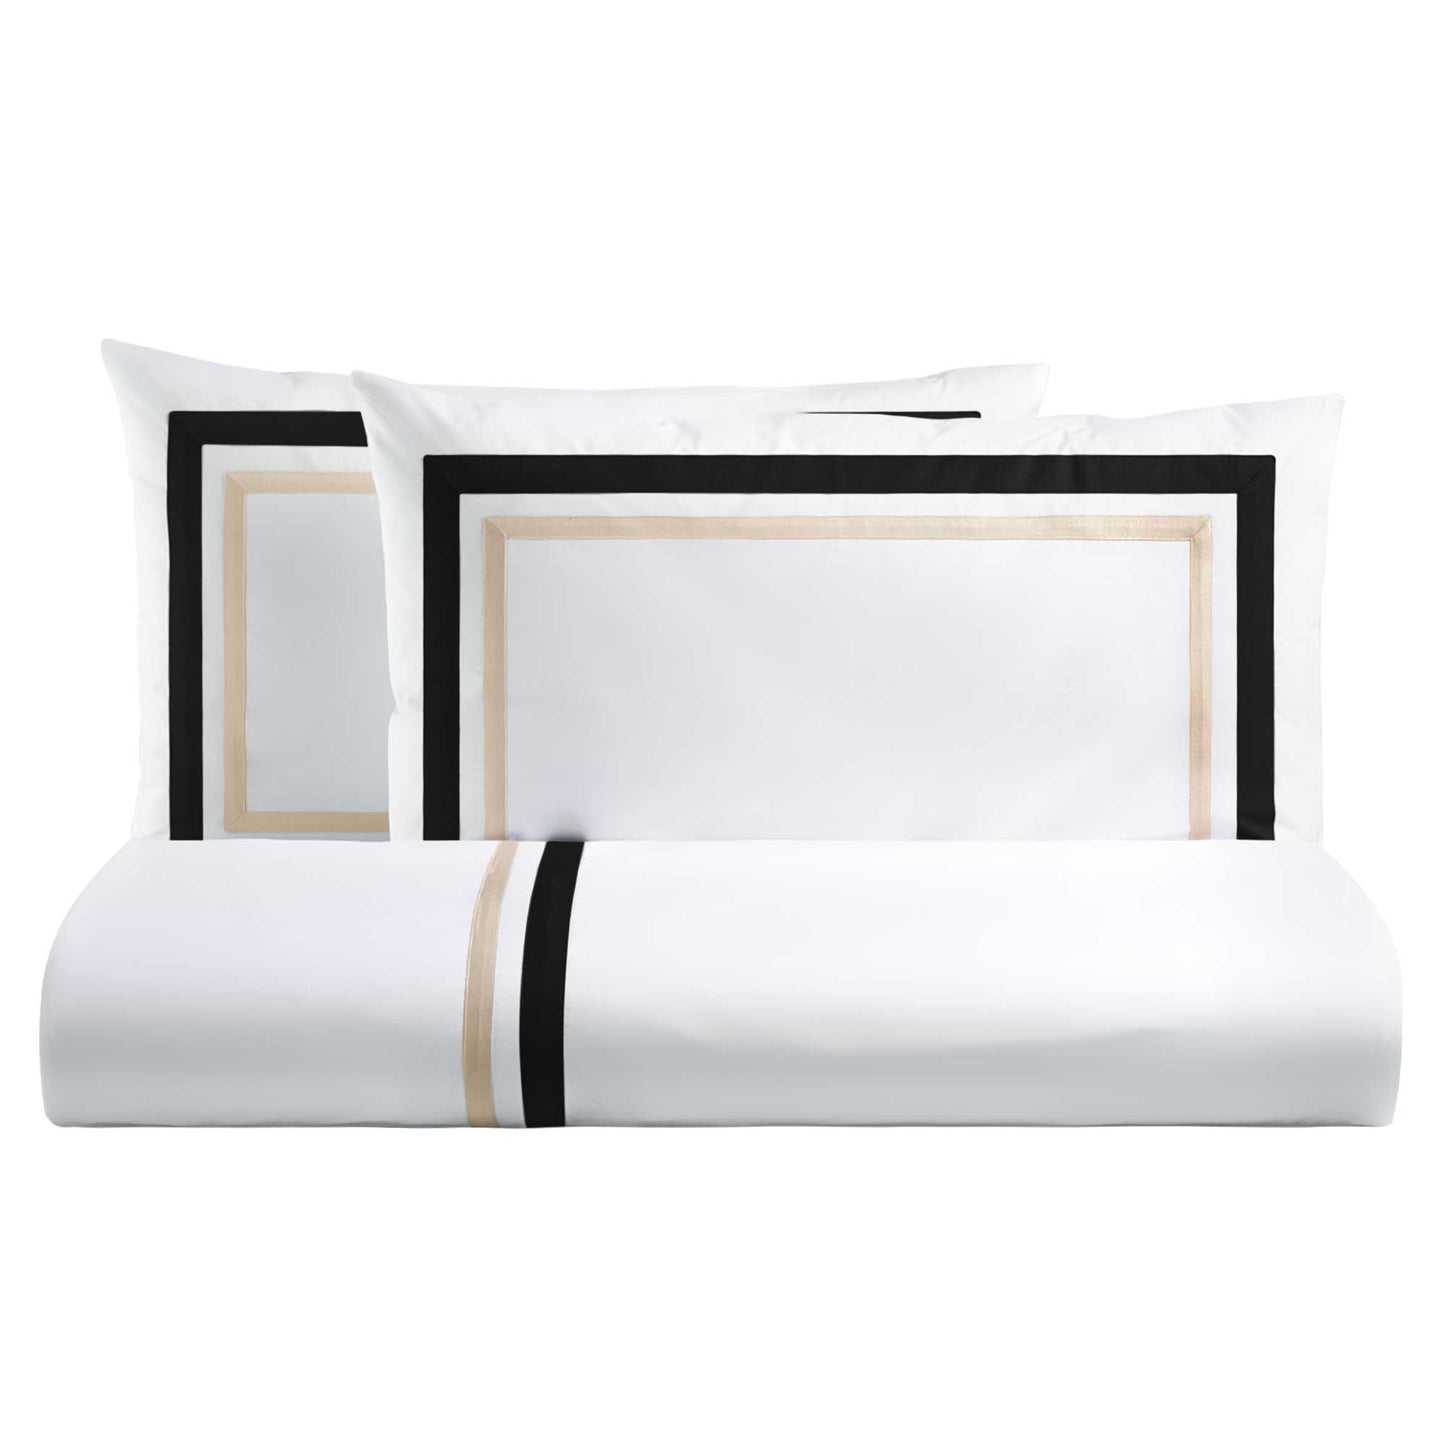 Duvet cover set in 400TC cotton percale with contrasting satin applications - Pure